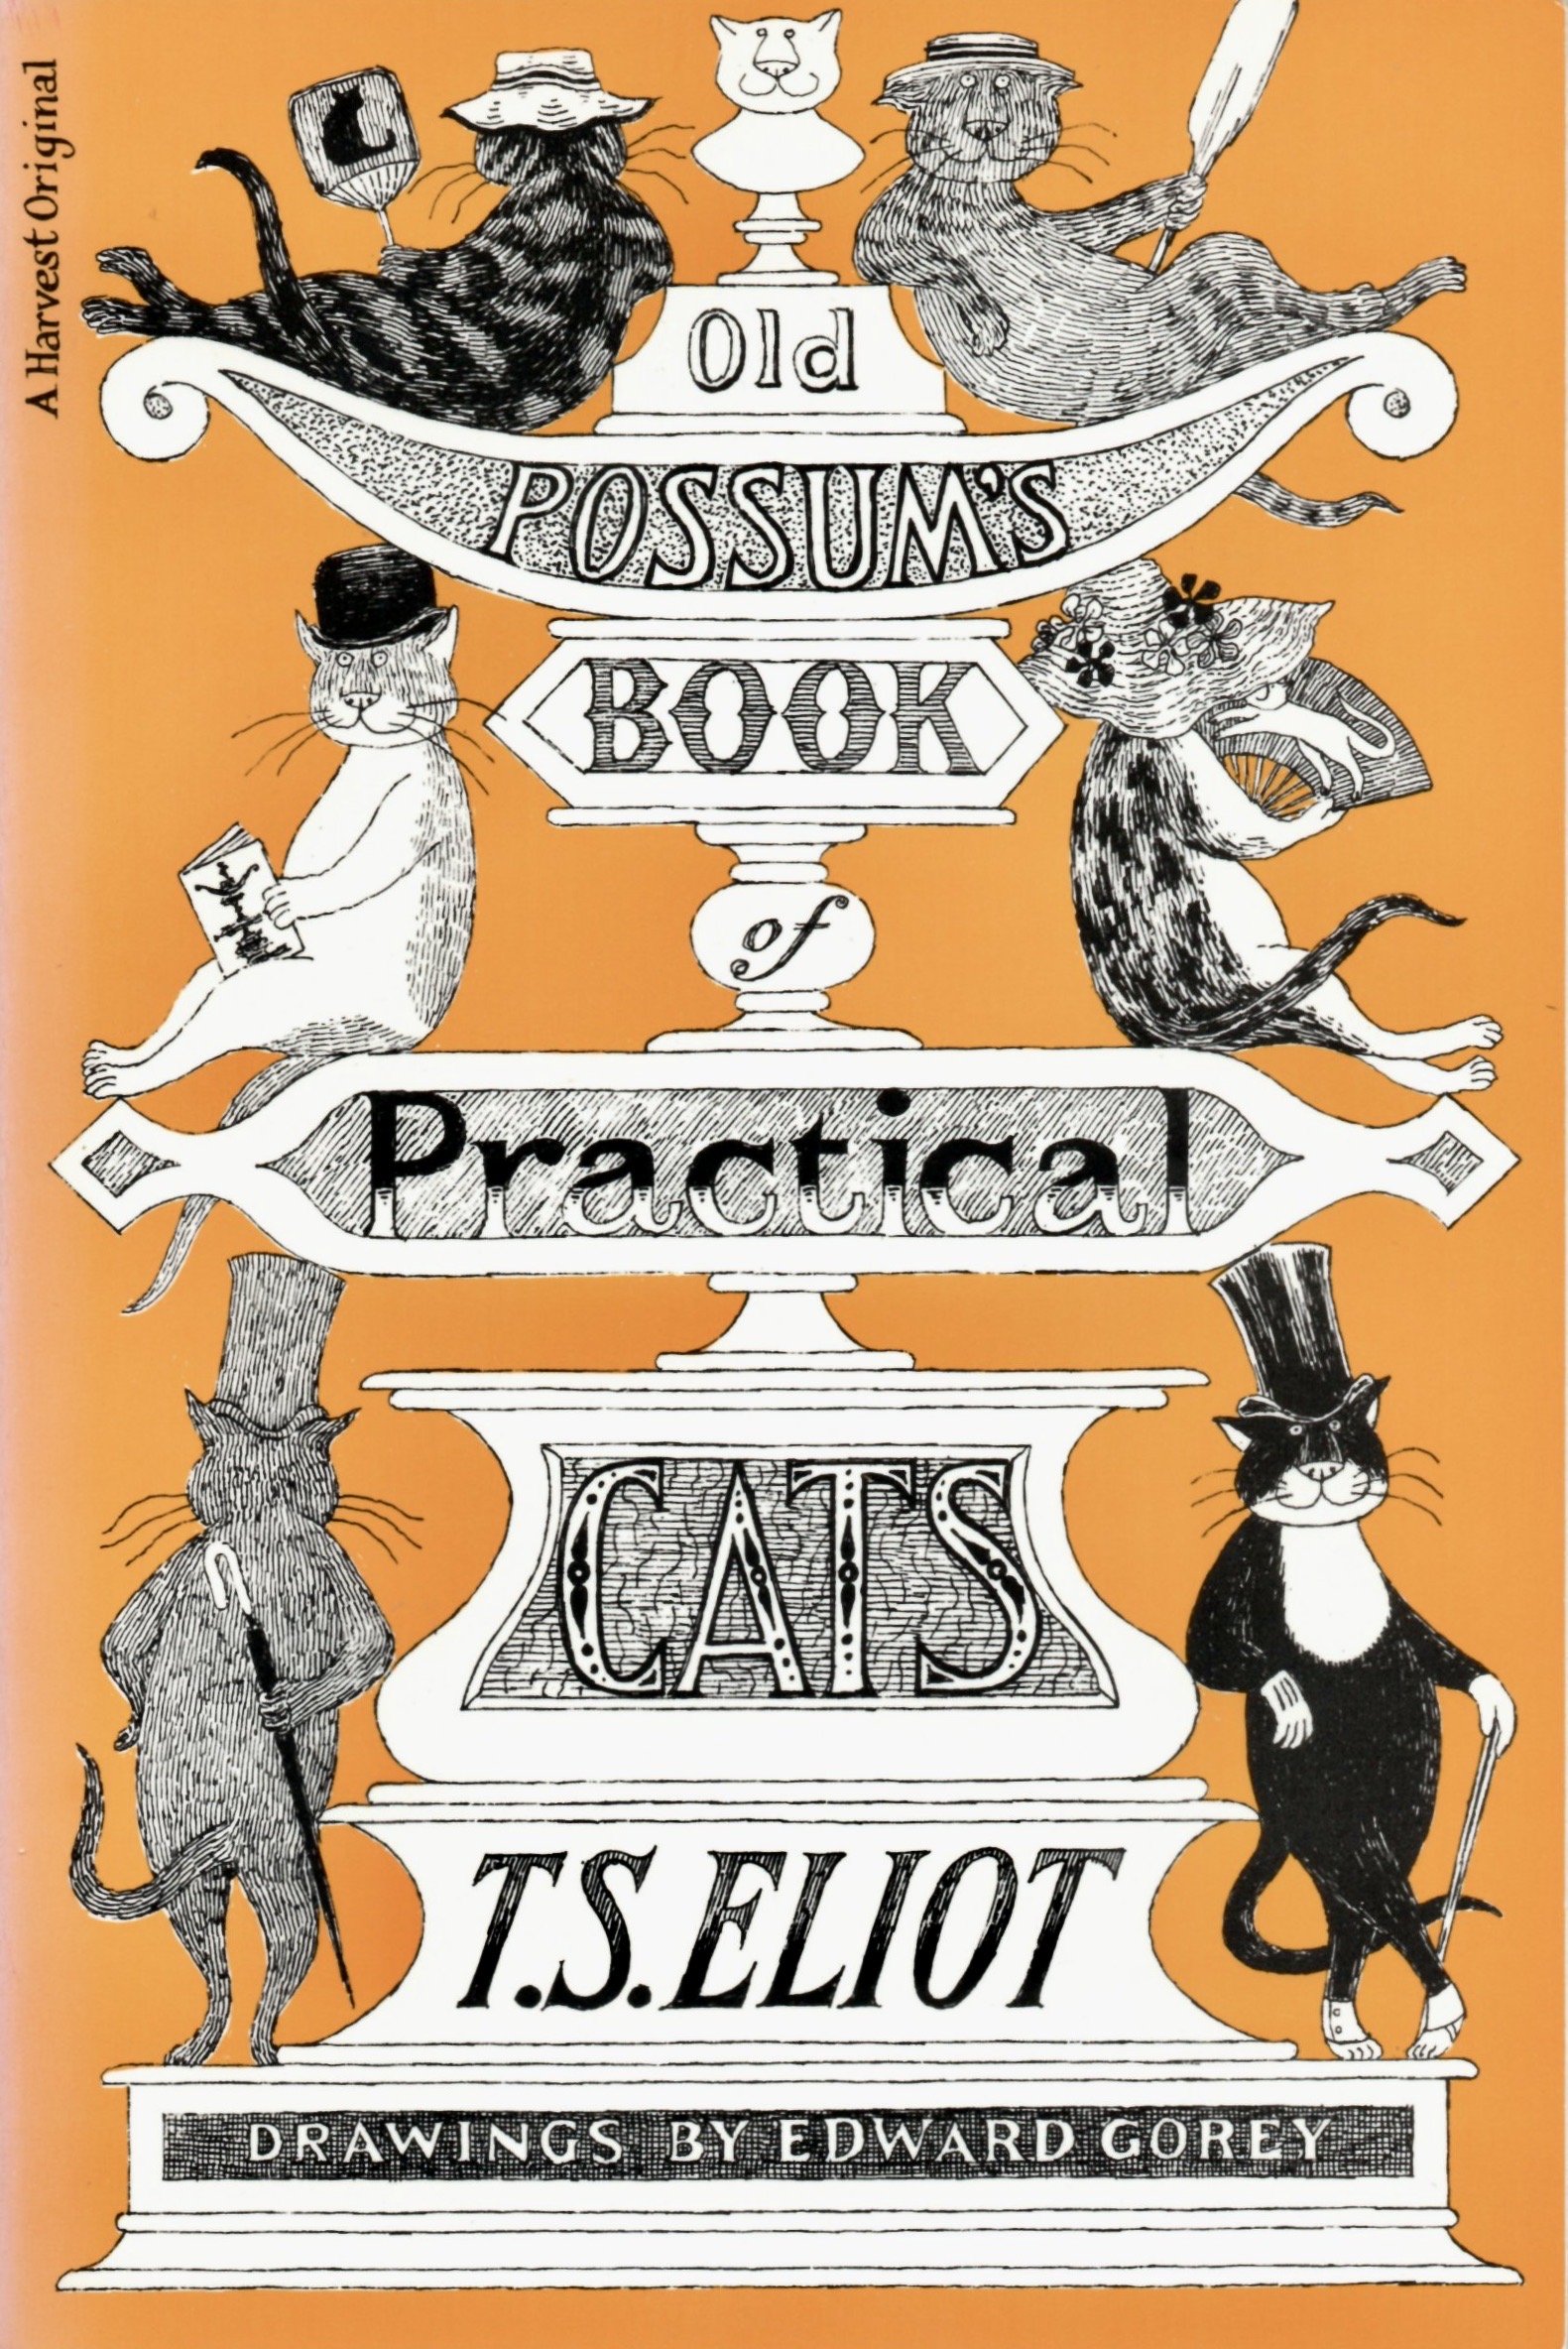  Edward Gorey’s fanciful cover to the paperback Harvest/Harcourt Brace &amp; Co. edition of  Old Possum’s Book of Practical Cats  by Eliot.  